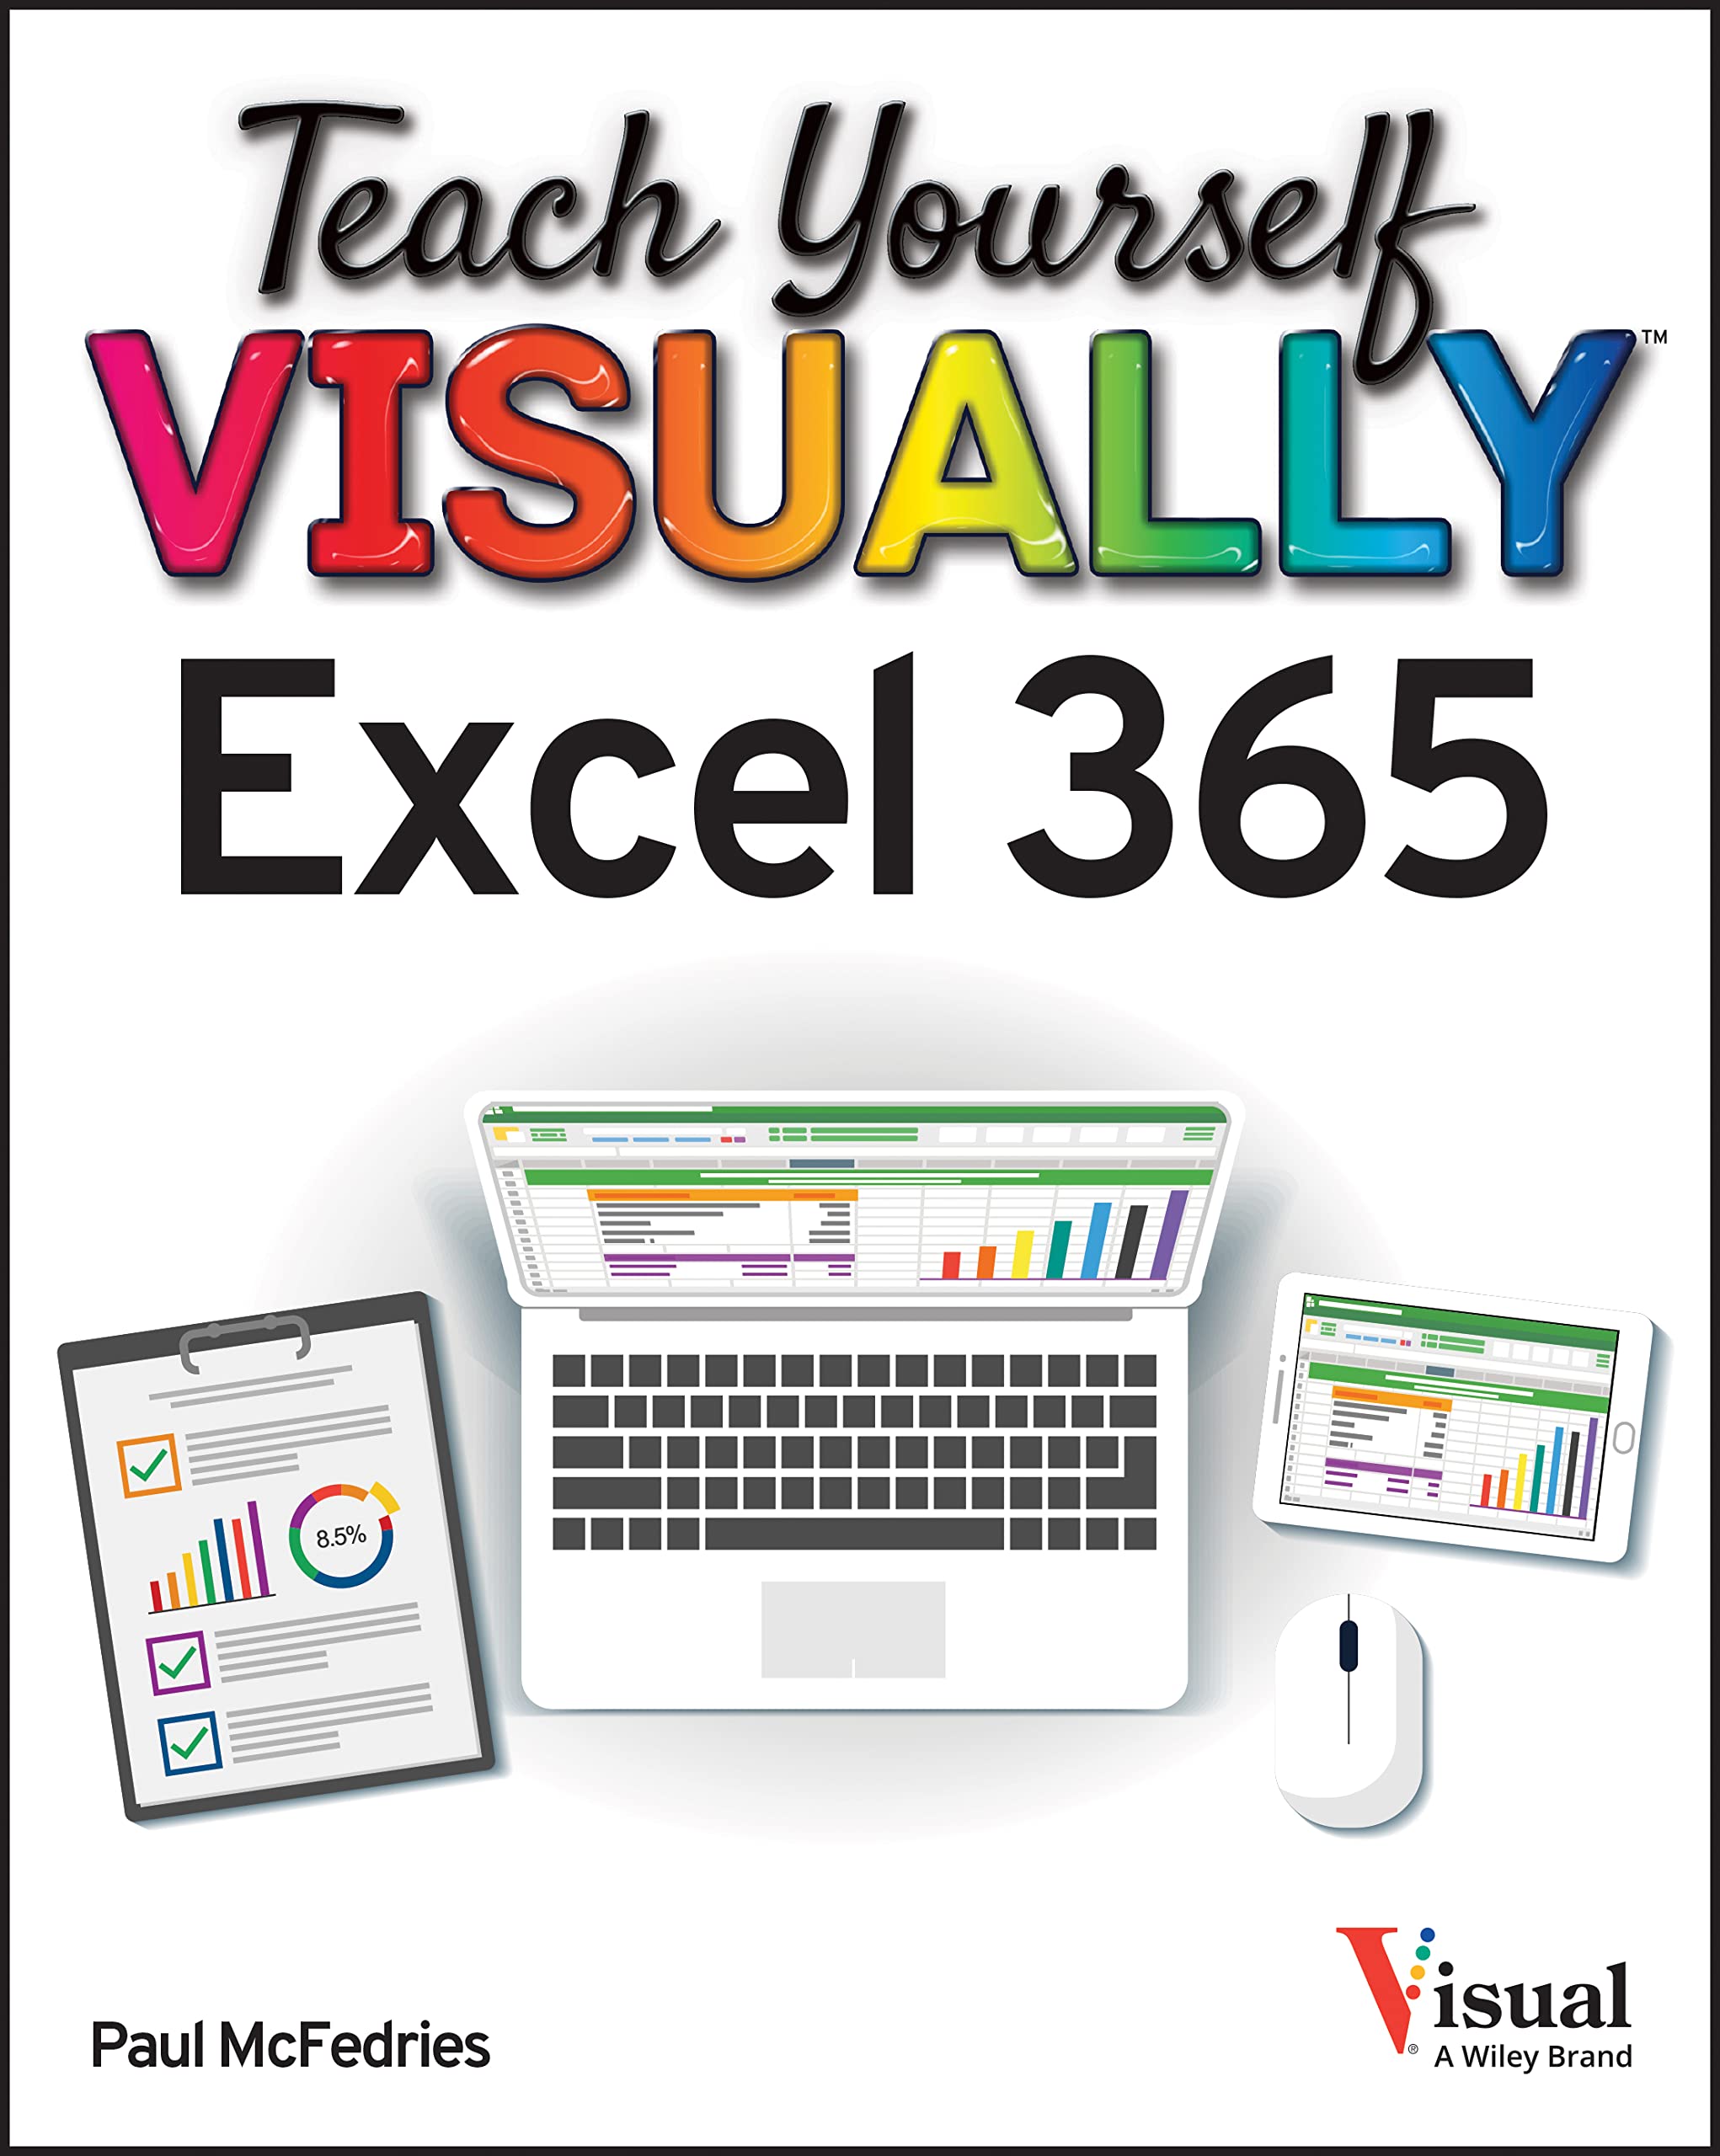 Teach Yourself Visually Excel 365 | Paul McFedries